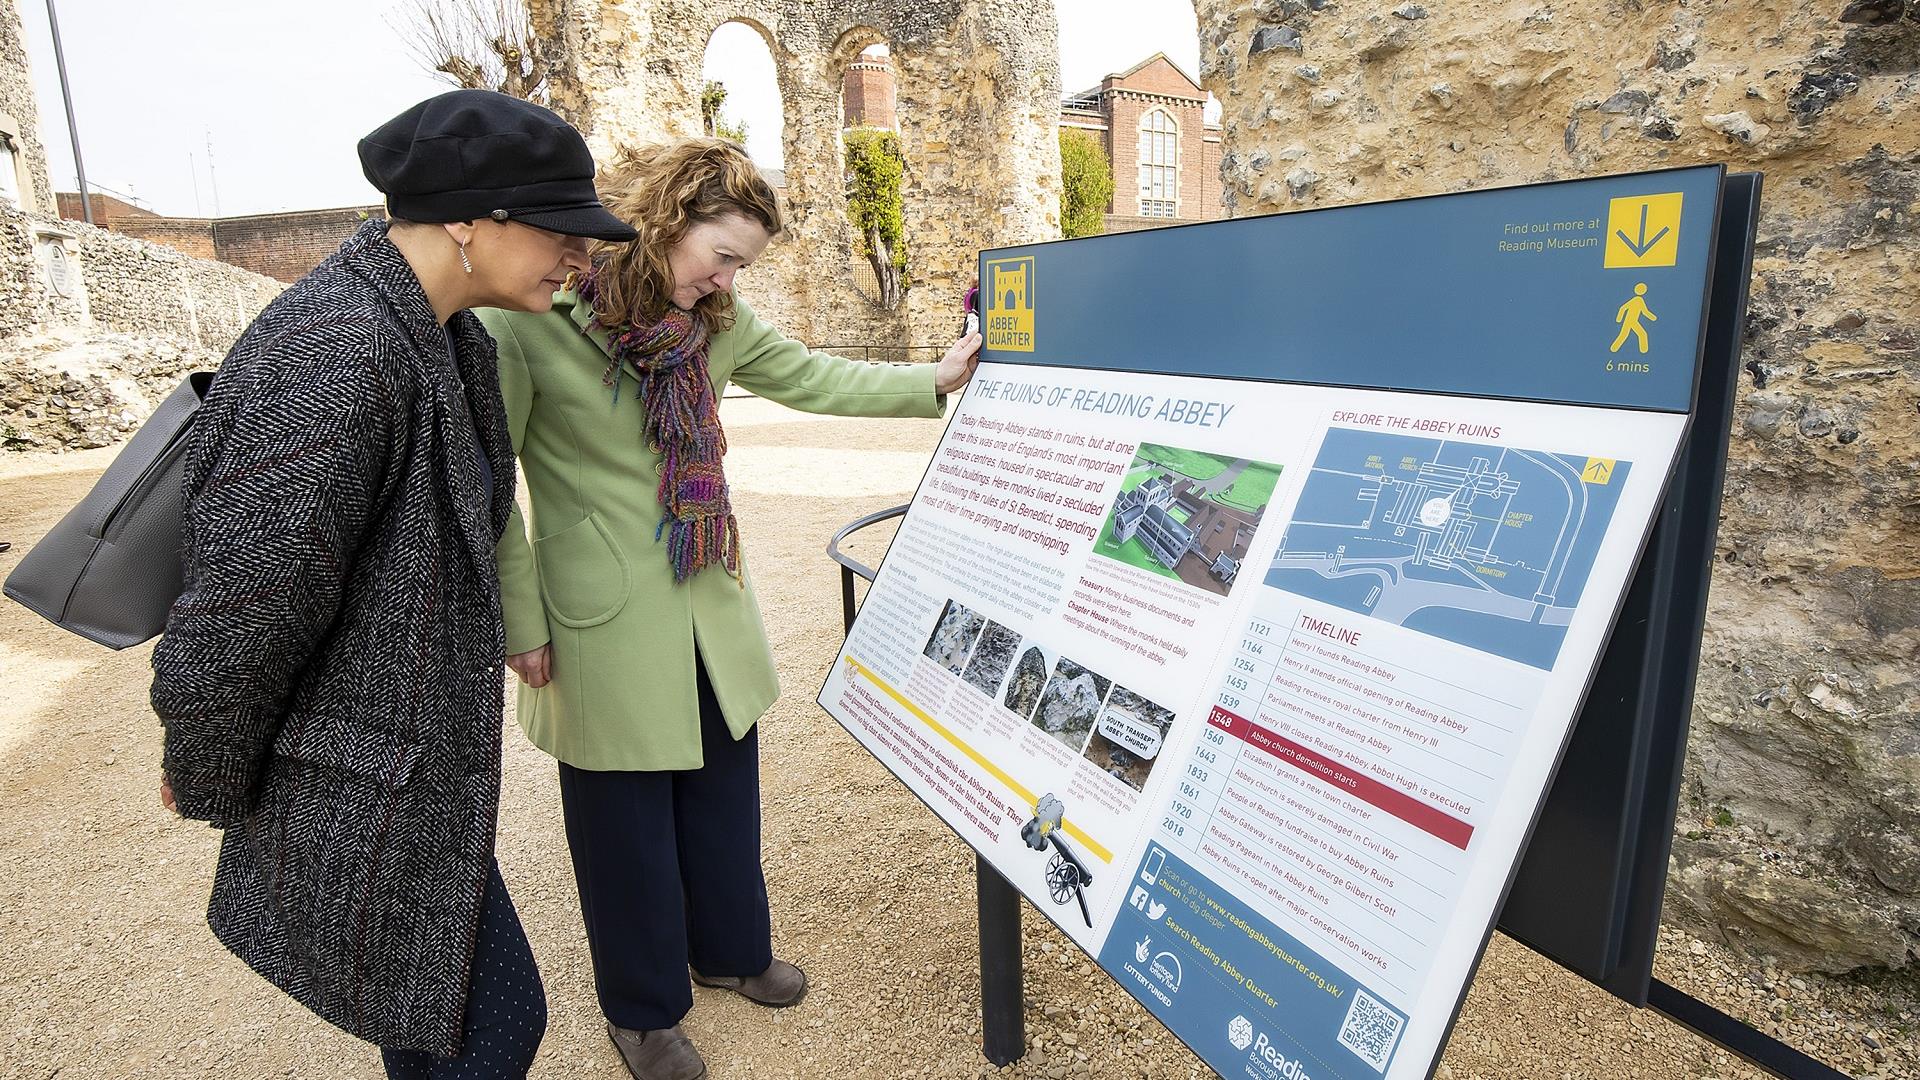 2 people reading an interpretation panel in the ruins of Reading Abbey